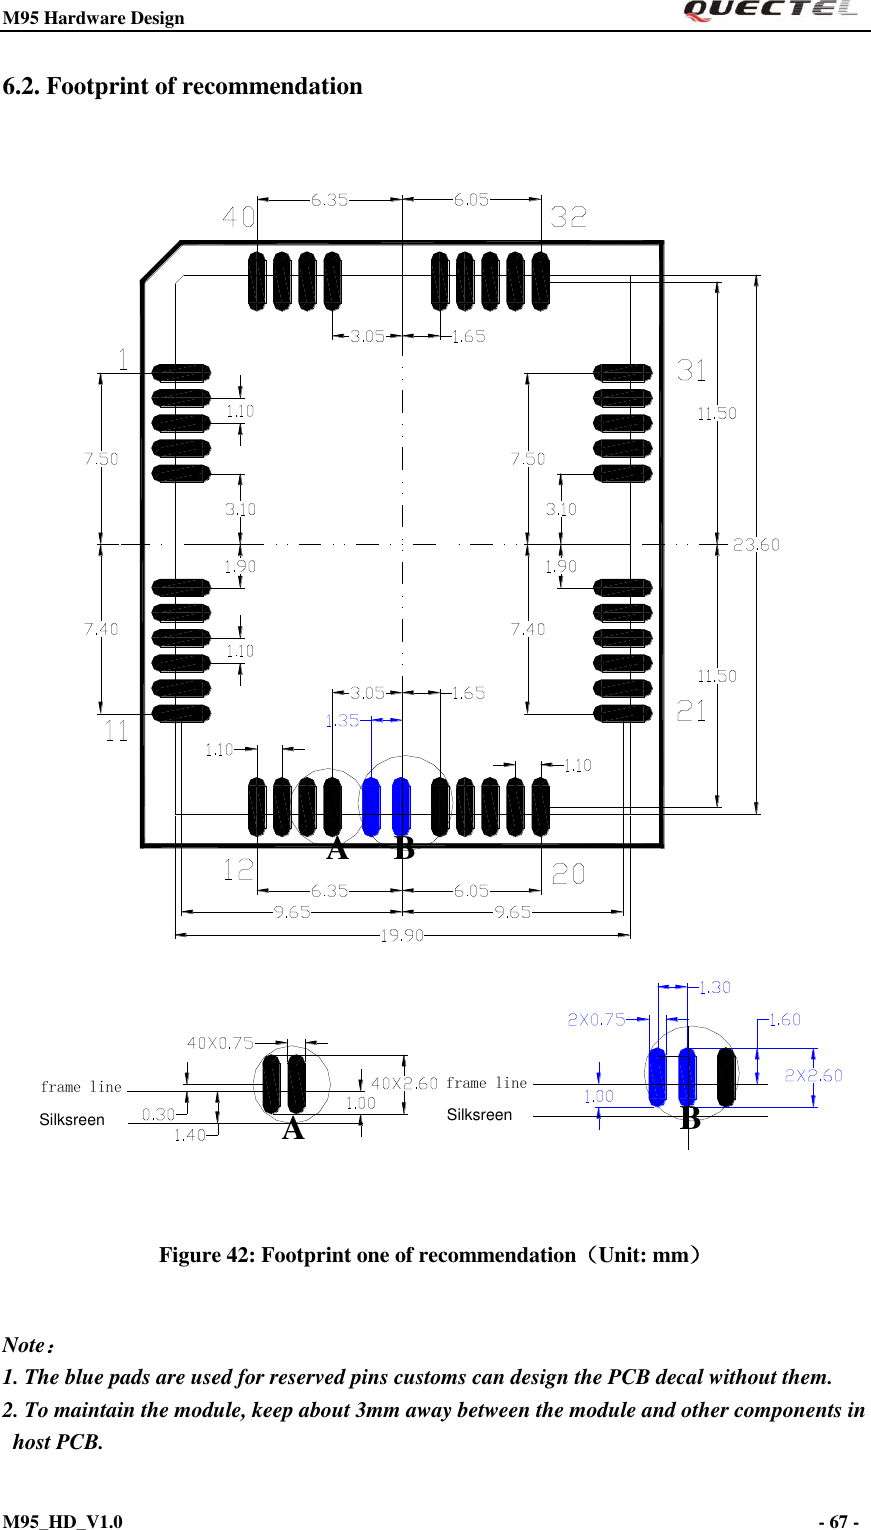 M95 Hardware Design                                                       M95_HD_V1.0                                                                - 67 -    6.2. Footprint of recommendation BBAASilksreen Silksreenframe line frame line Figure 42: Footprint one of recommendation（Unit: mm）  Note： 1. The blue pads are used for reserved pins customs can design the PCB decal without them.   2. To maintain the module, keep about 3mm away between the module and other components in host PCB. 